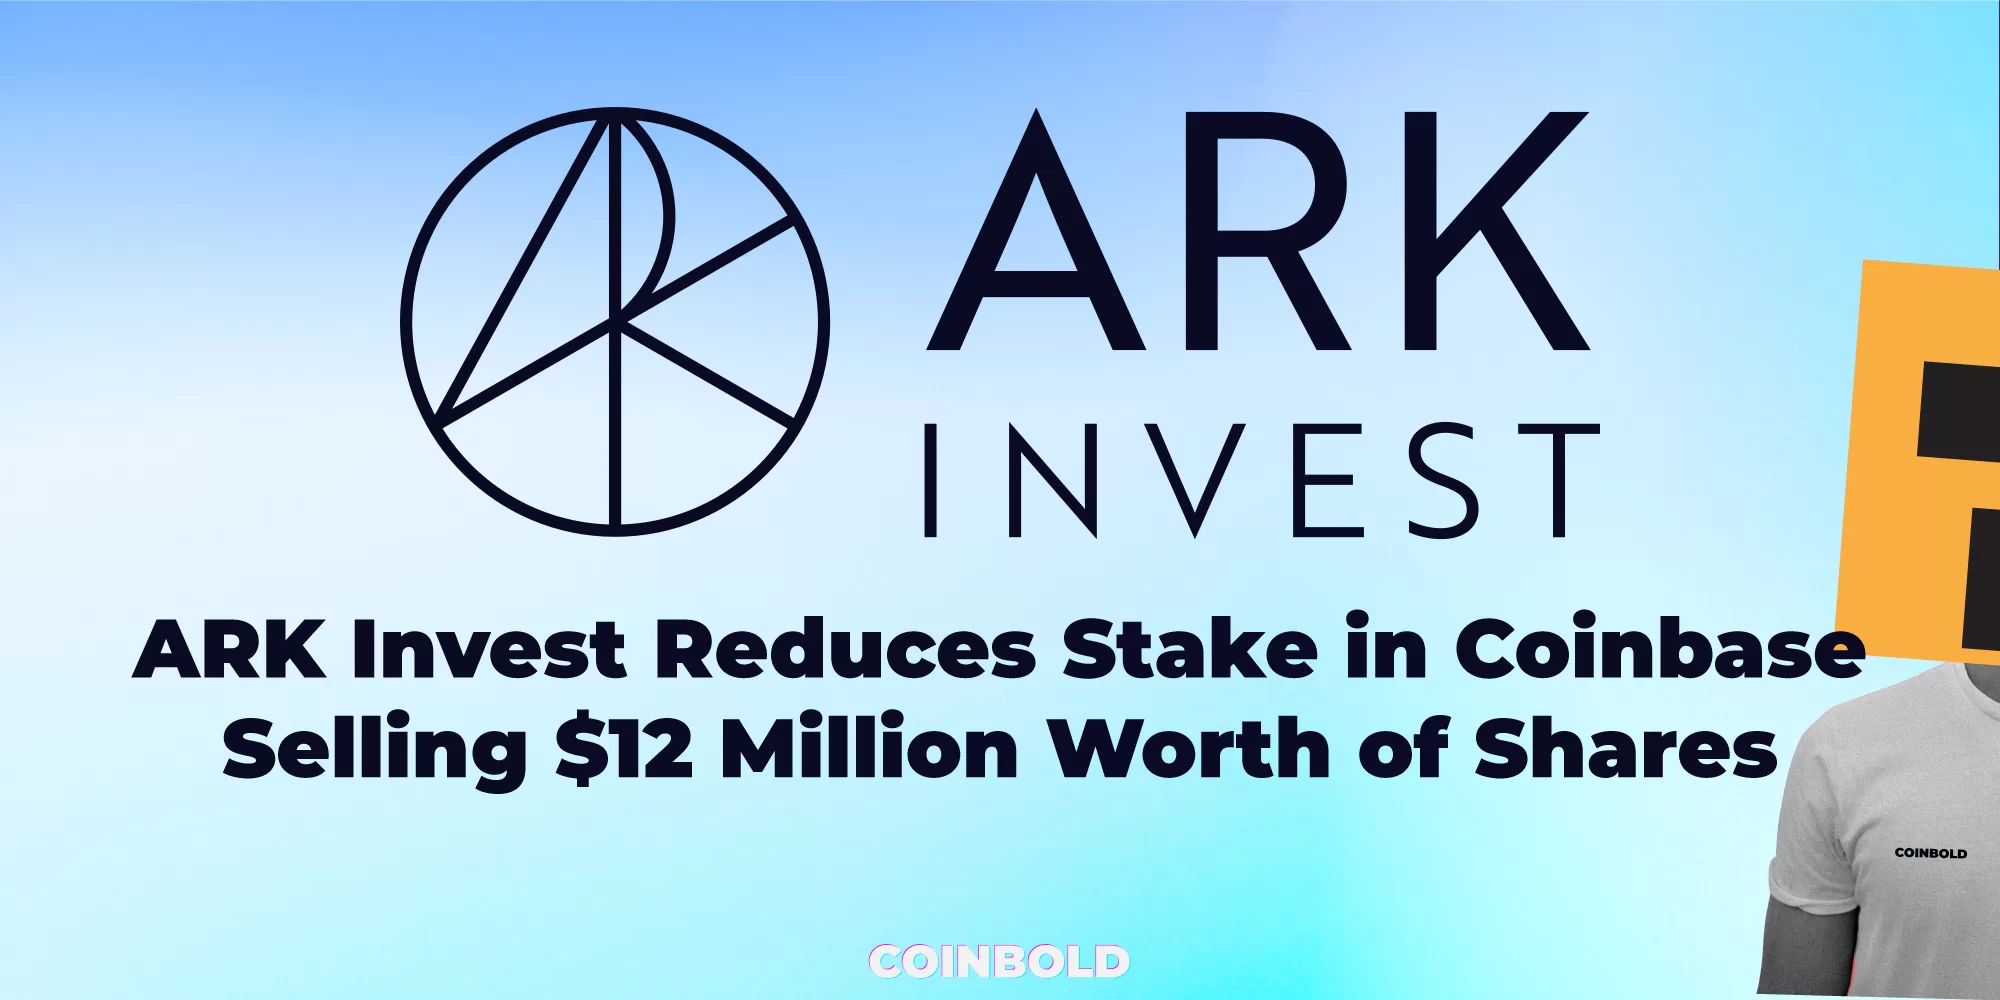 ARK Invest Reduces Stake in Coinbase, Selling $12 Million Worth of Shares